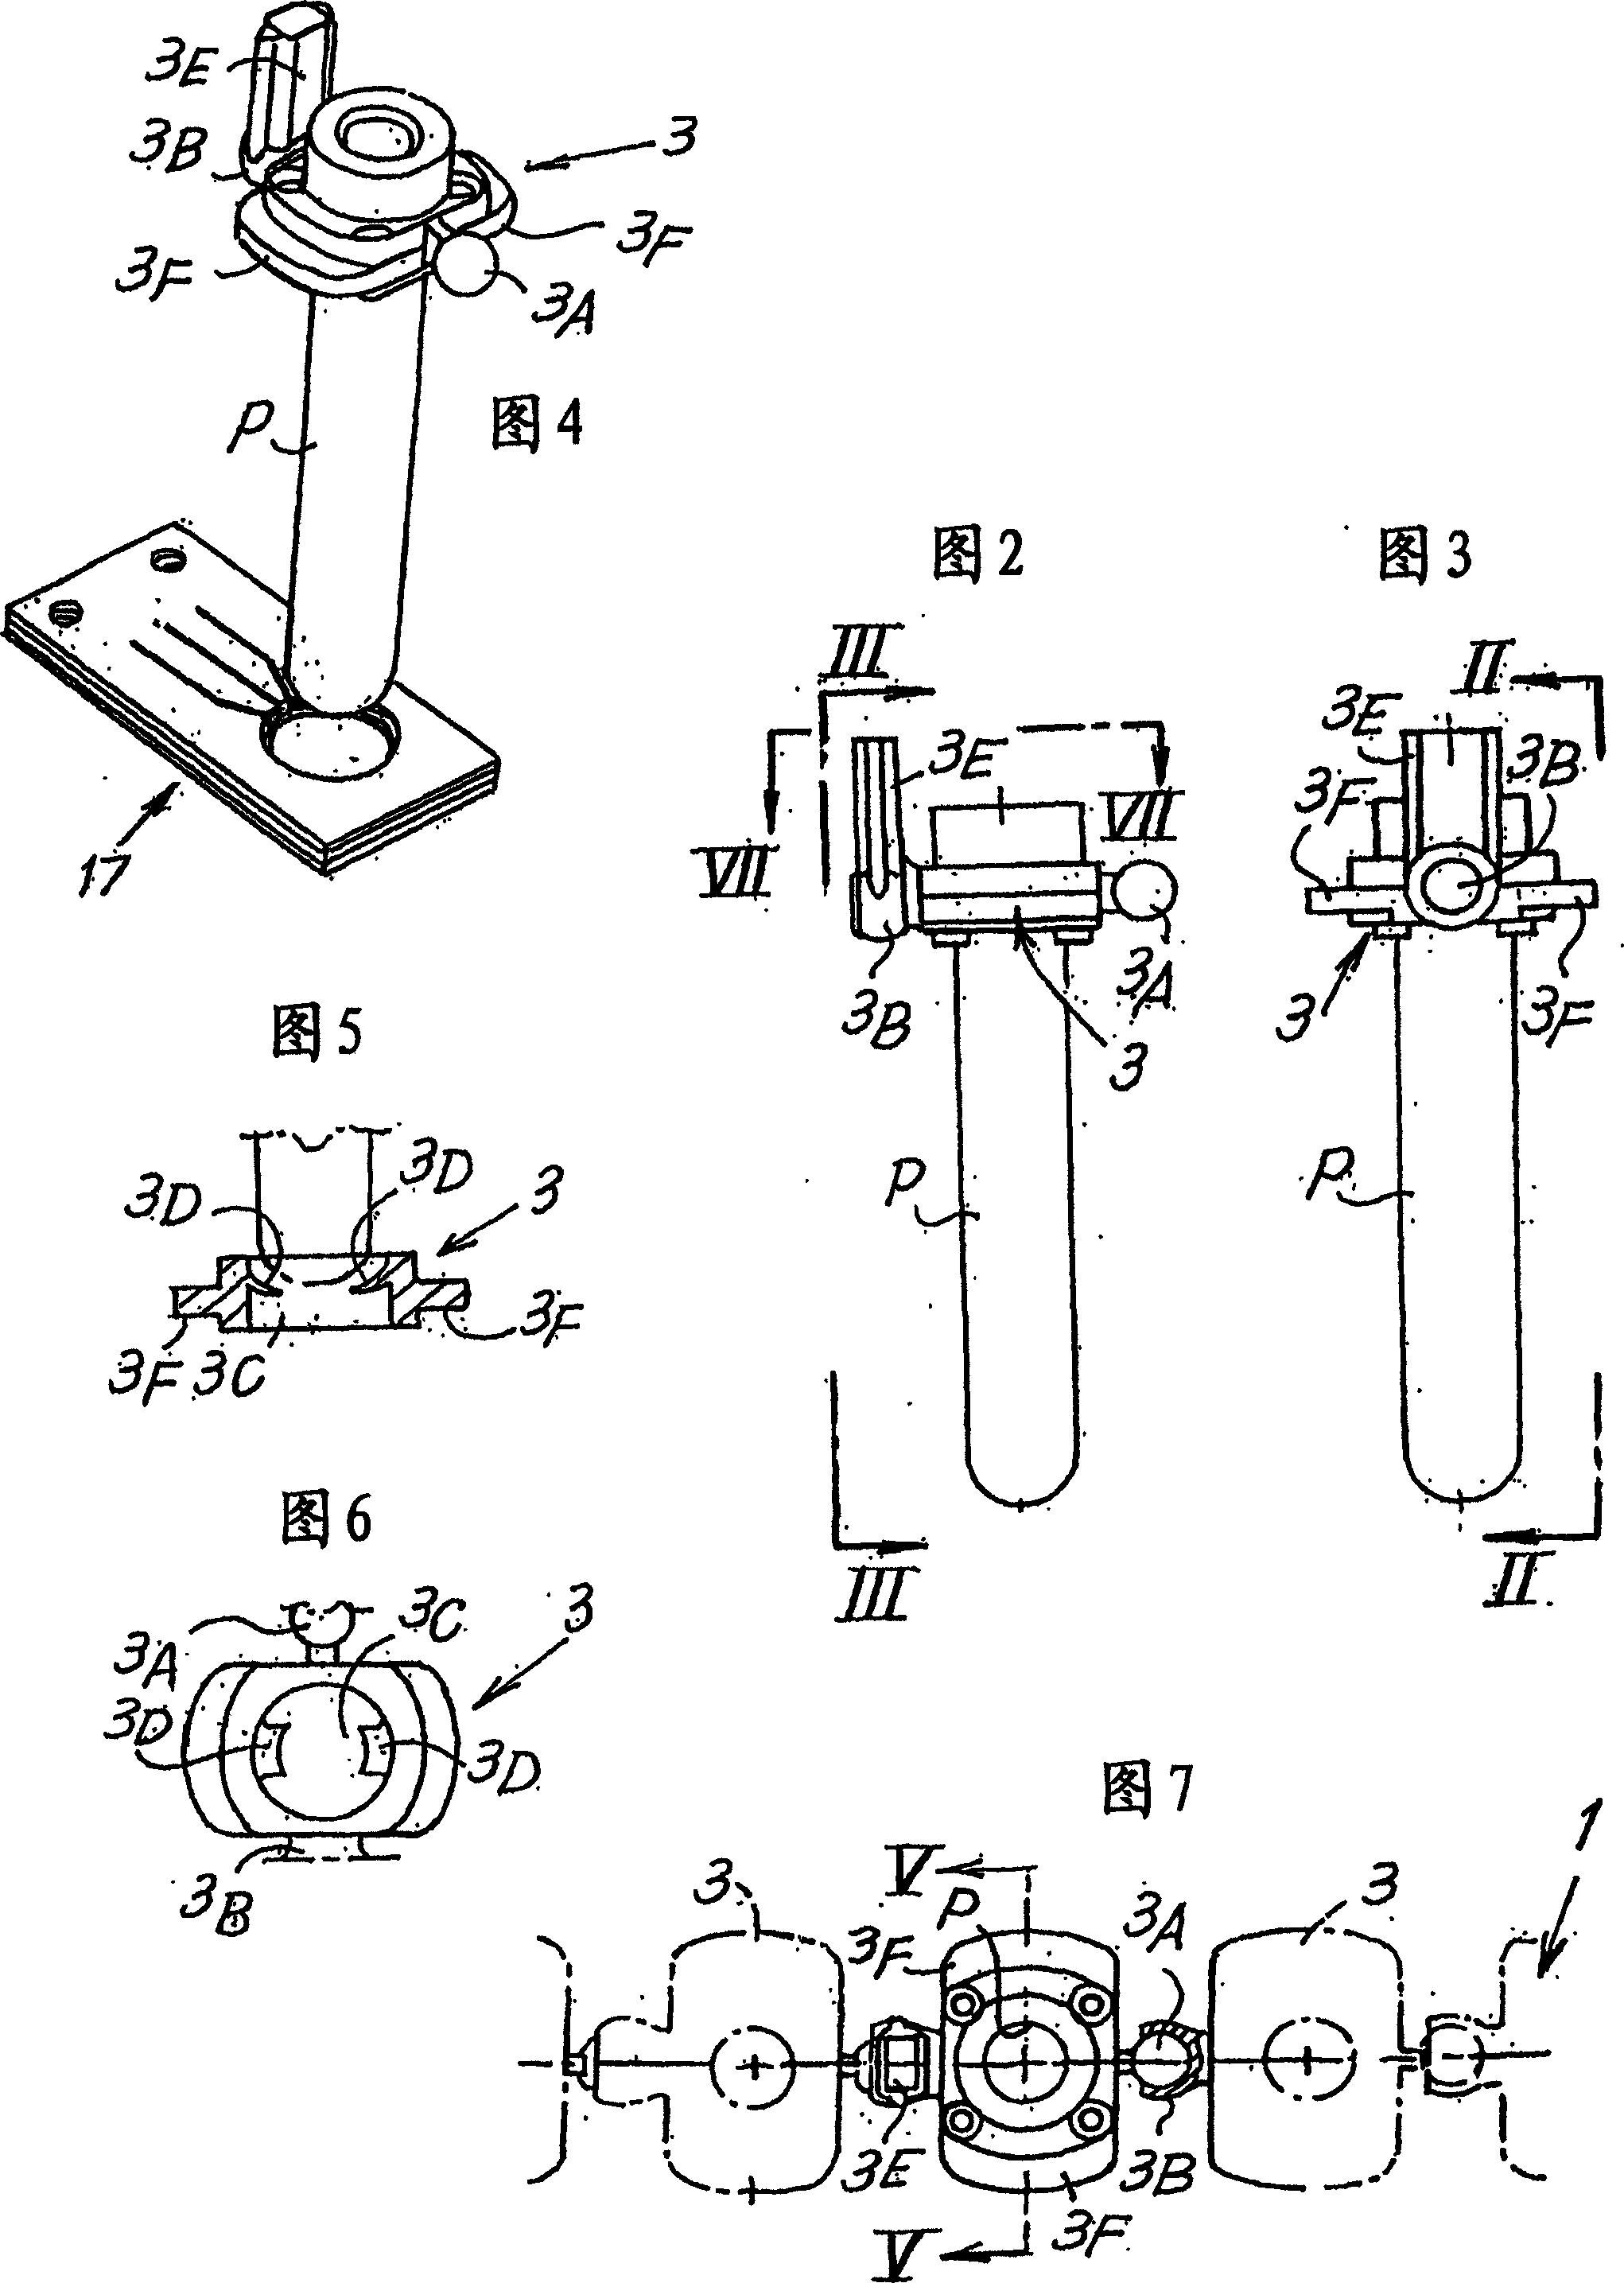 Device for performing analyses on biological fluids and related method